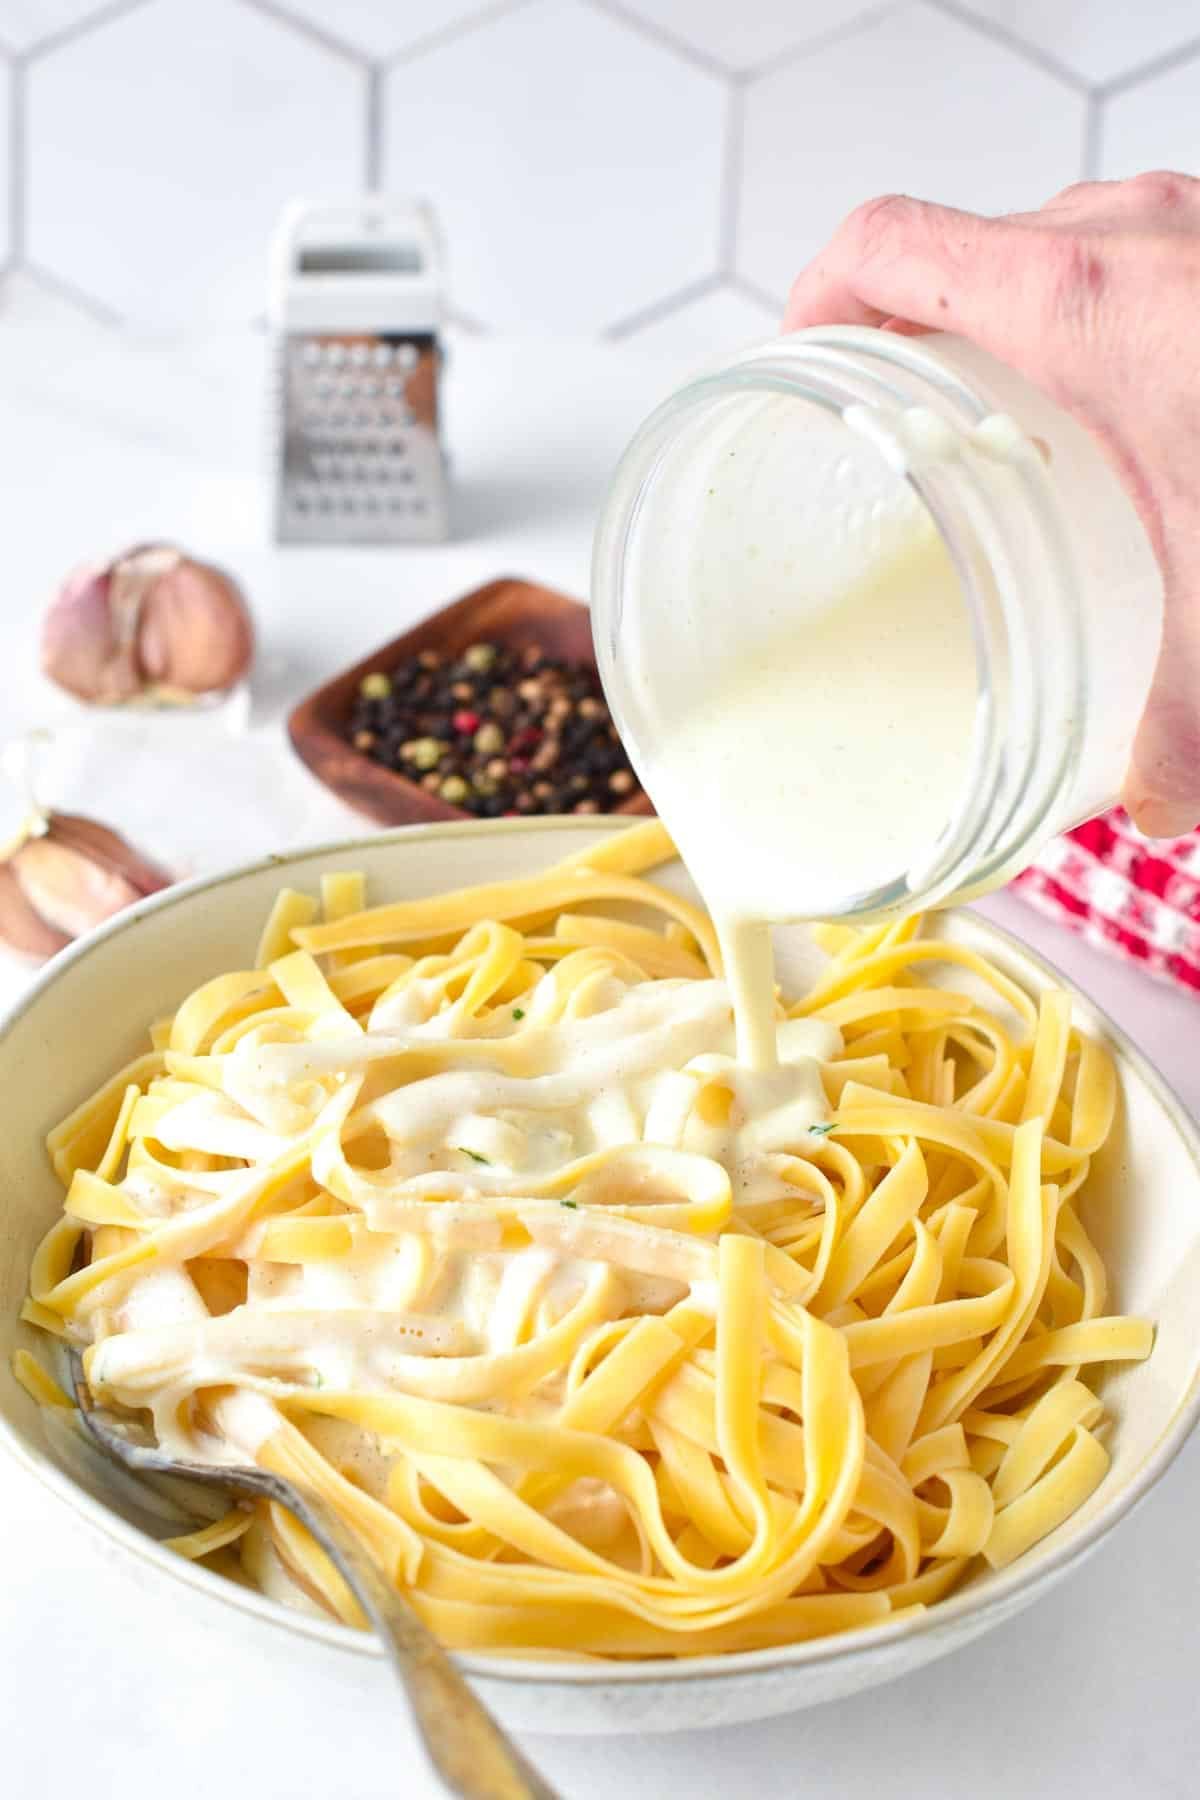 This Alfredo Greek Yogurt Pasta sauce is a lightened-up version of the traditional Alfredo sauce recipe. It's packed with proteins from Greek yogurt, lower in fats and calories but with the same delicious creamy garlic flavors you love.